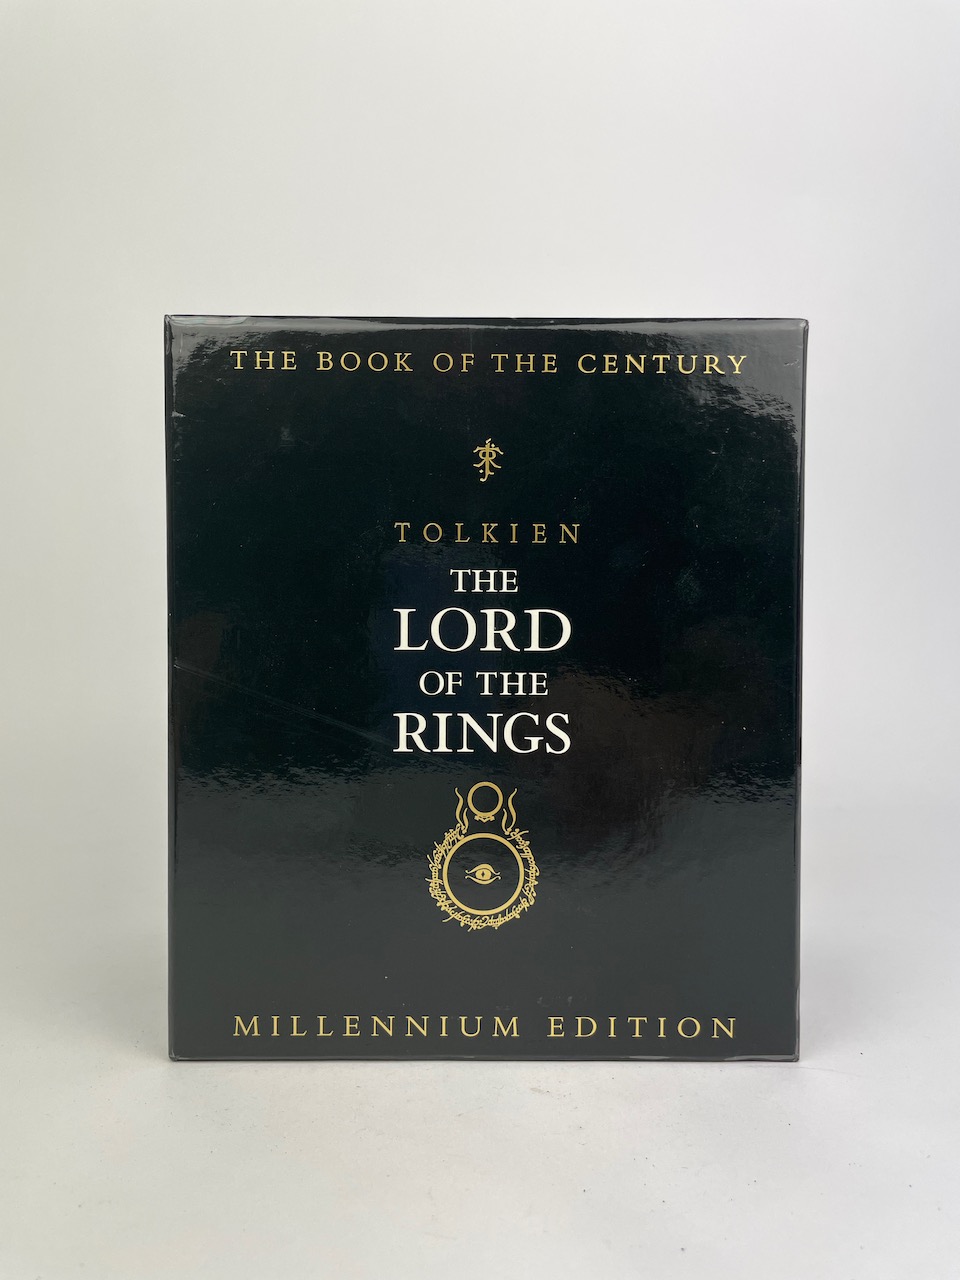 The Lord of the Rings 7 Volume Millenium Edition with CD 4